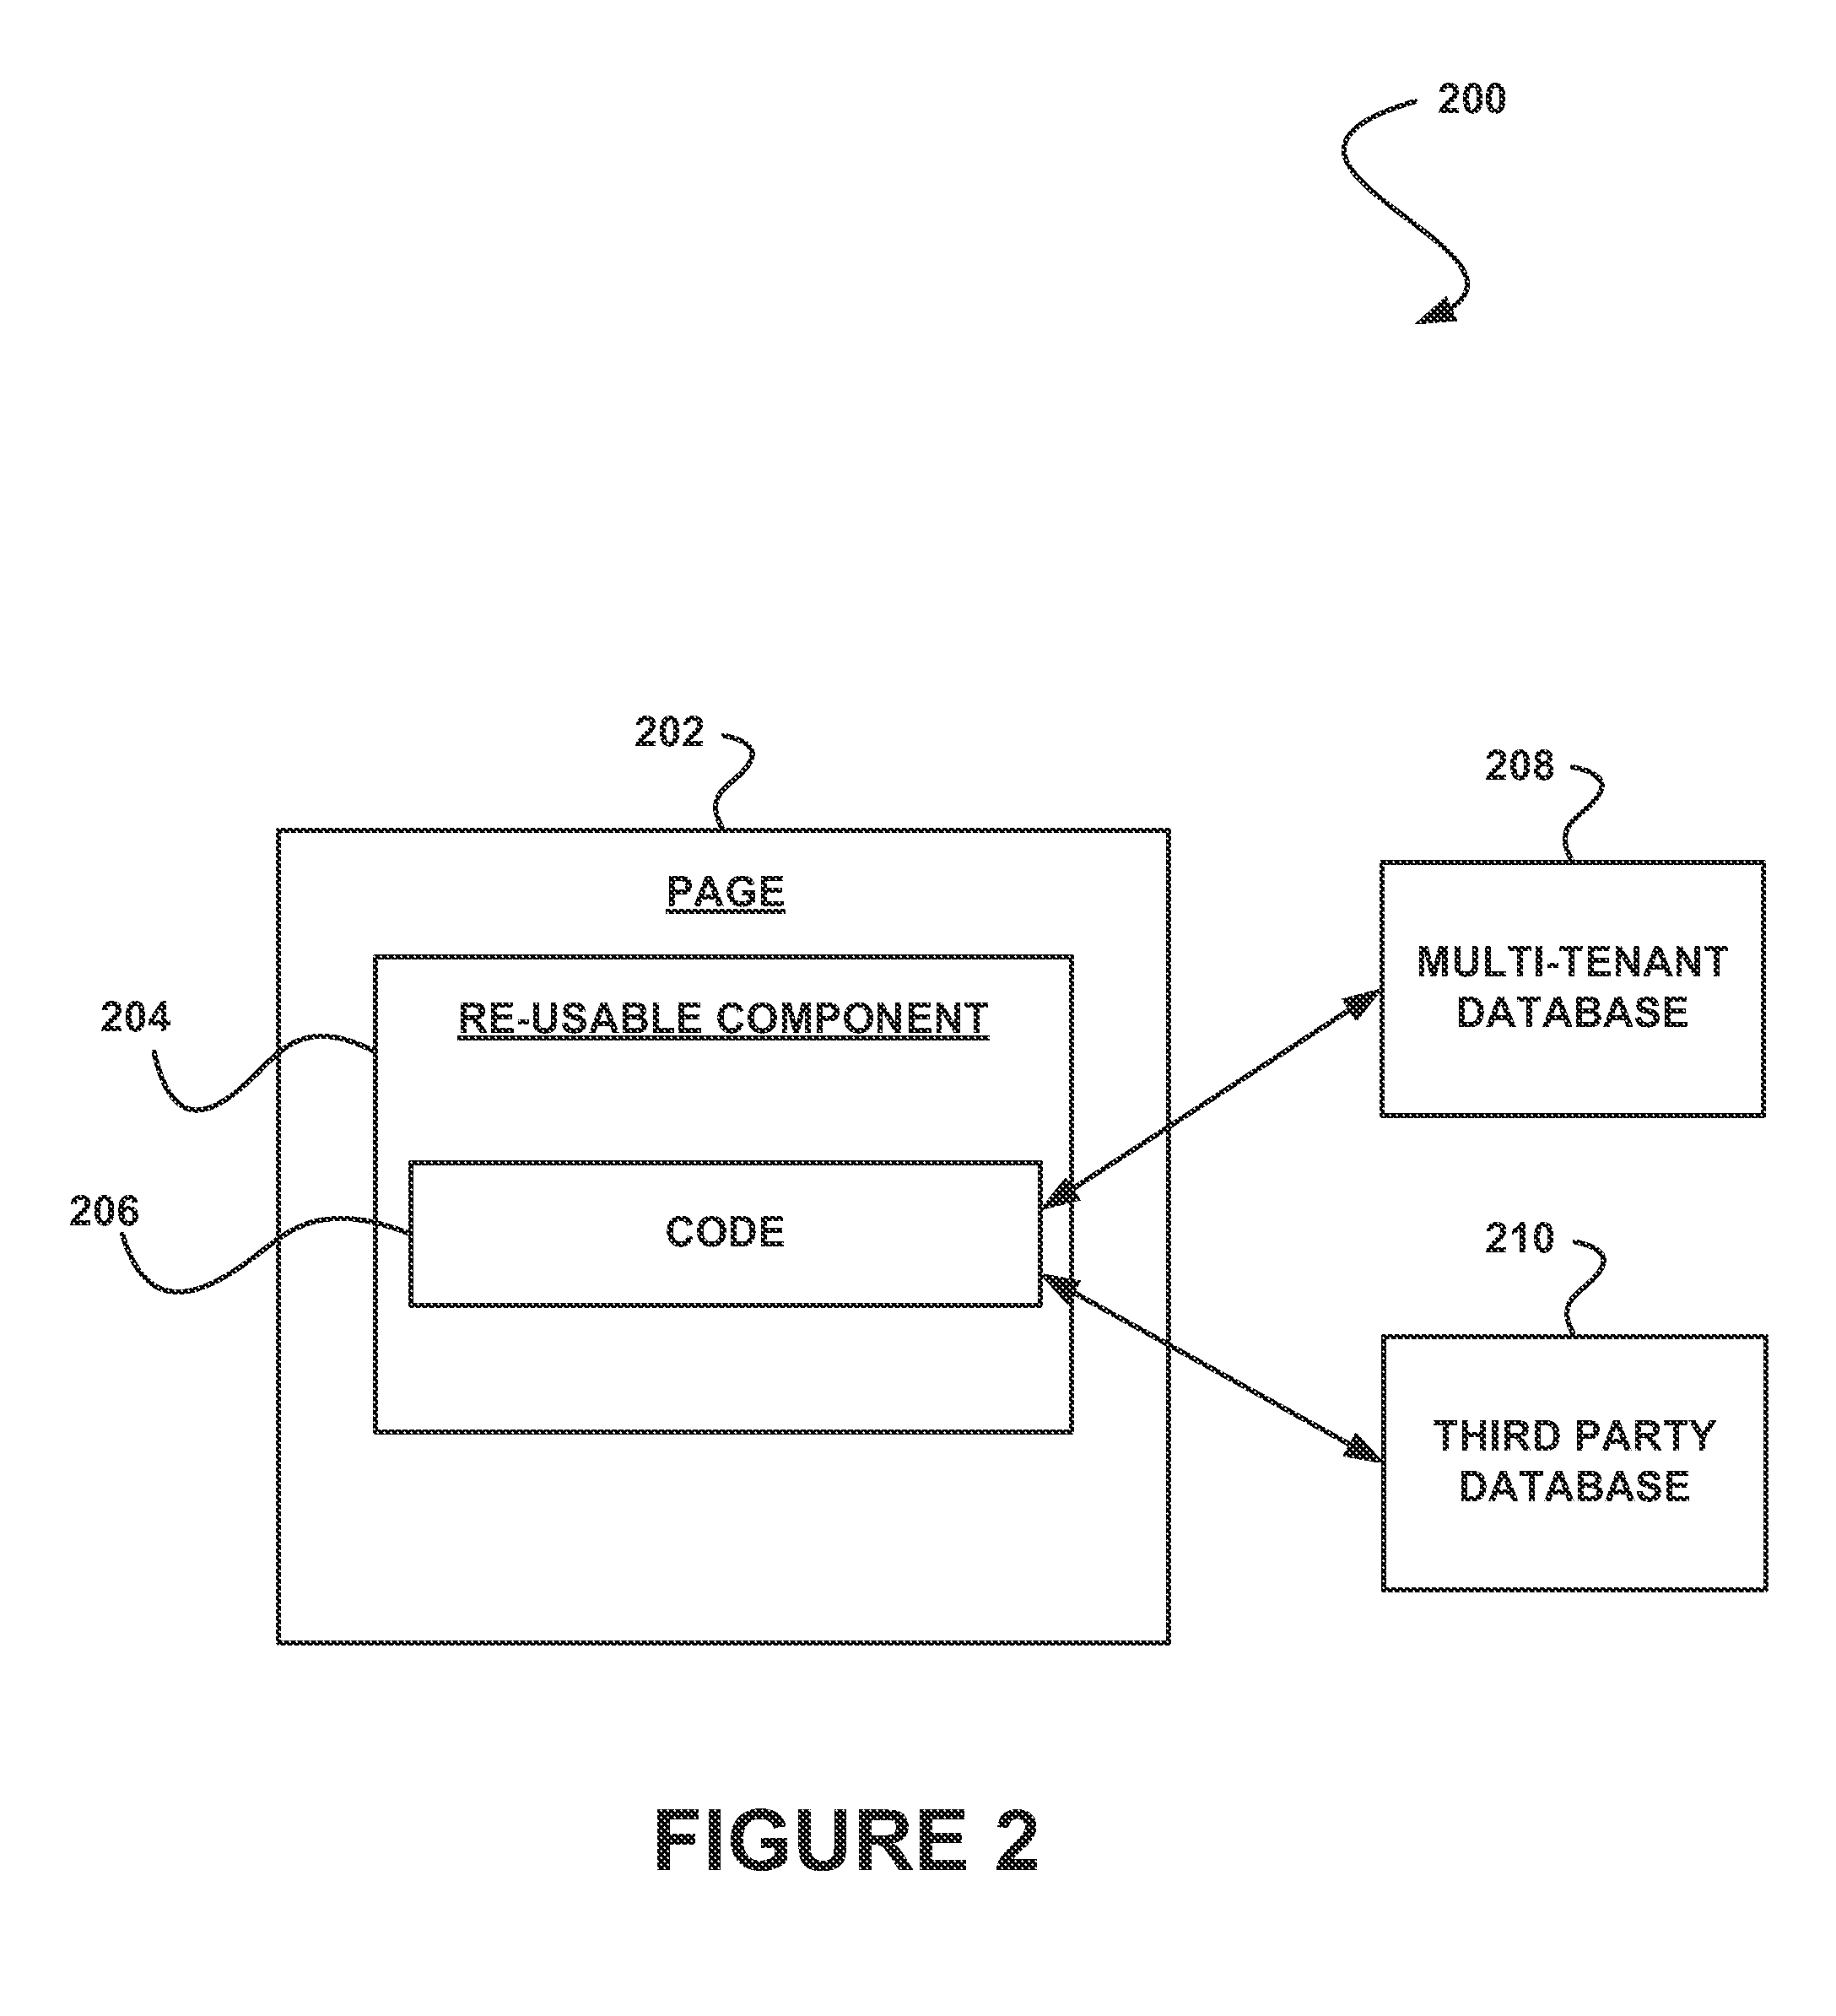 System, method and computer program product for creating a re-usable component utilizing a multi-tenant on-demand database service